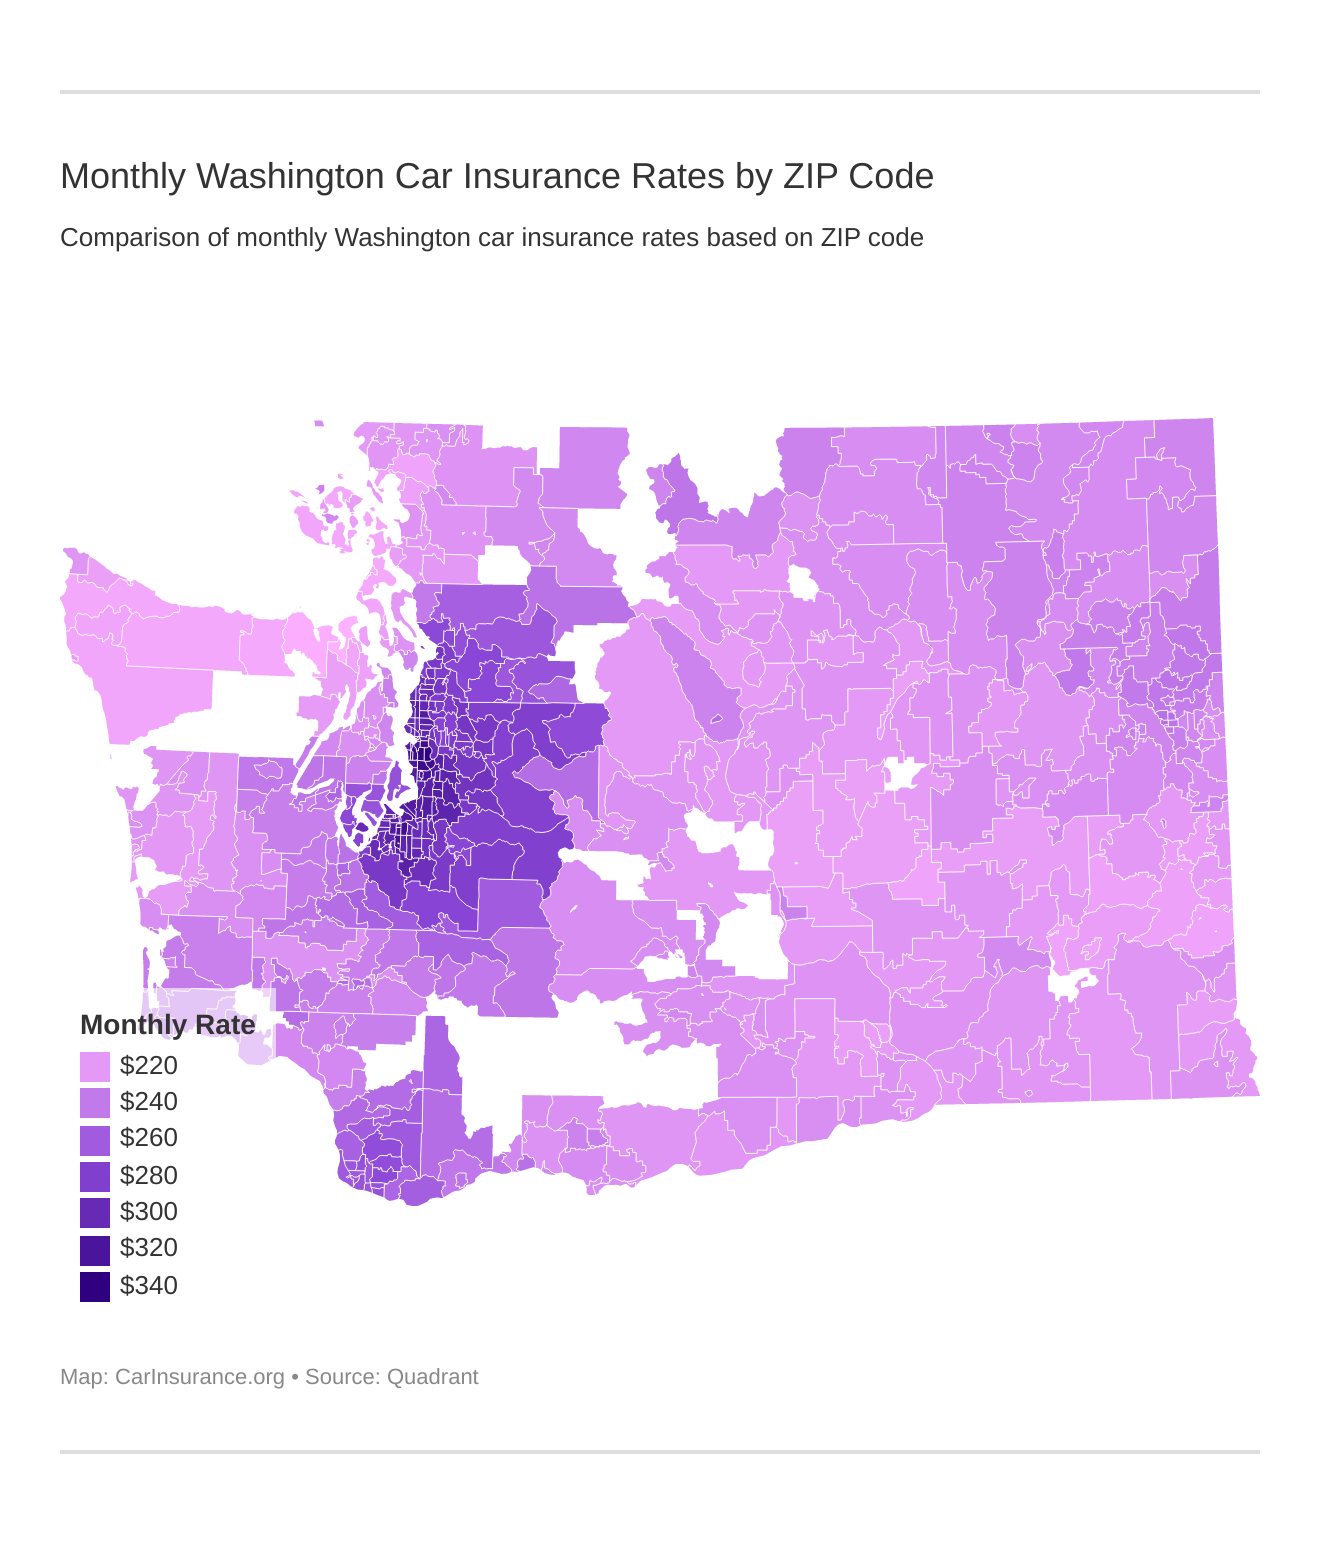 Monthly Washington Car Insurance Rates by ZIP Code